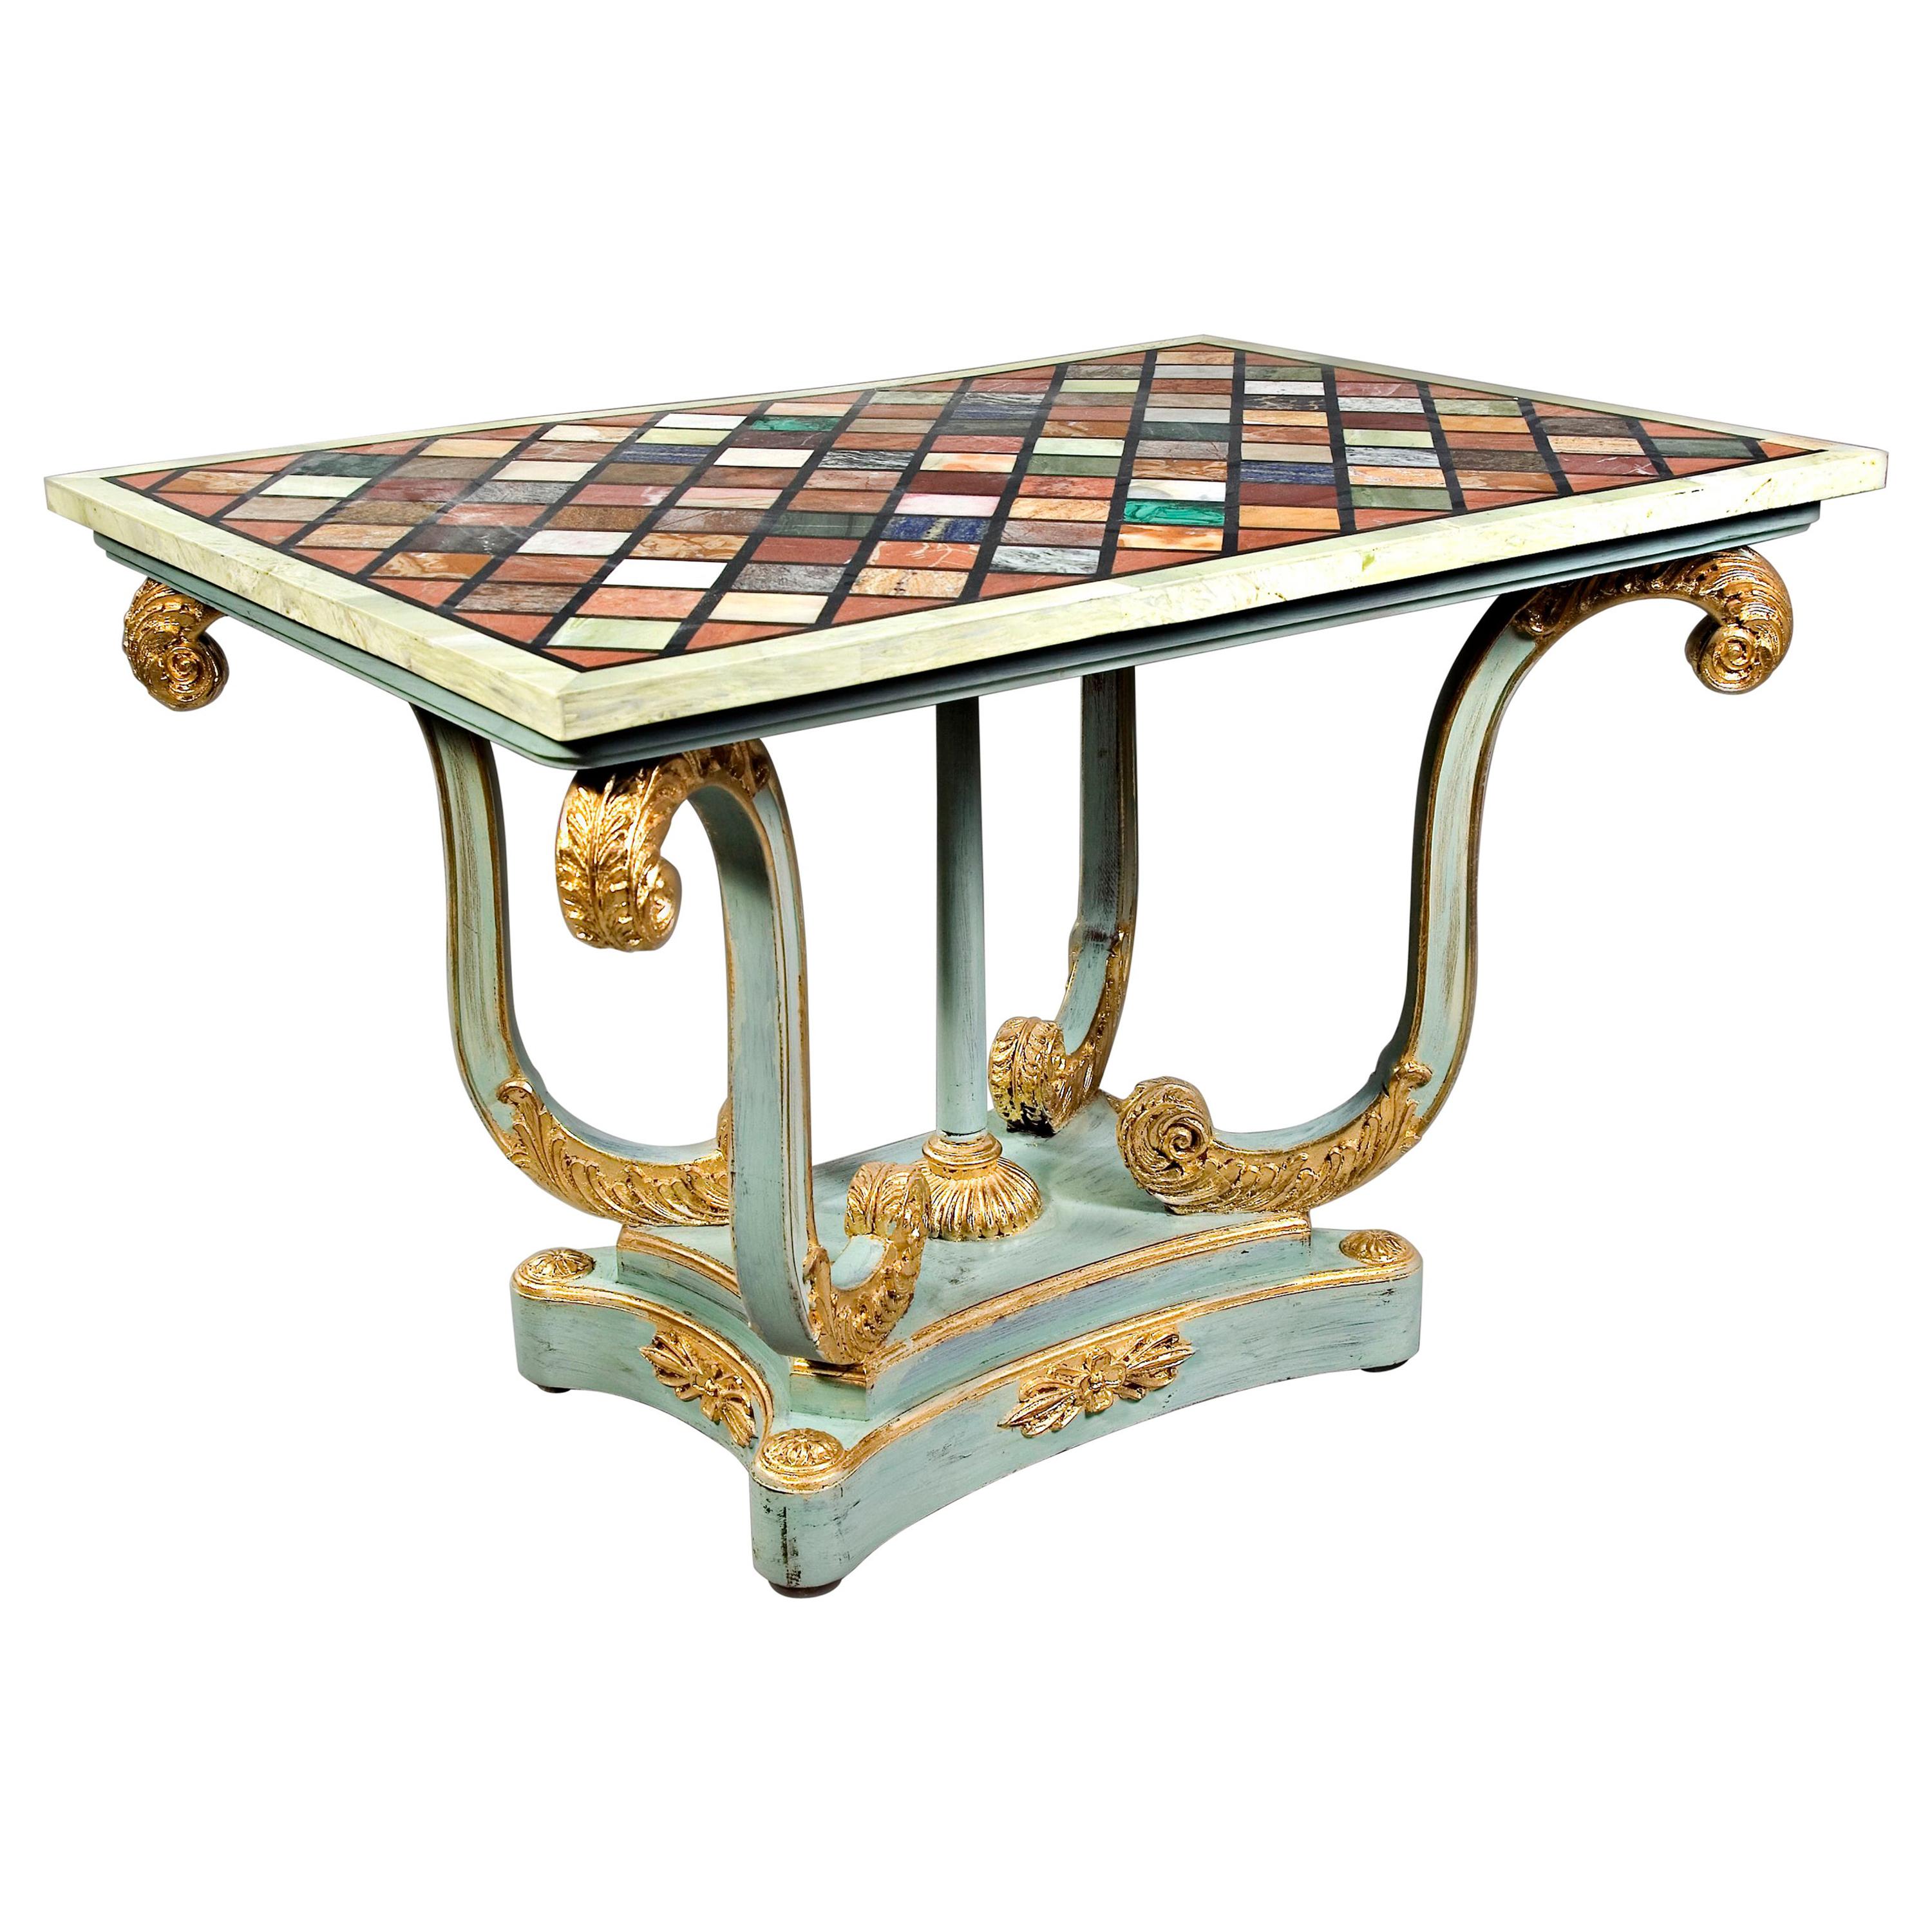 20th Century Pietra-Dura Style of Classicism Pastel Light Blue Table